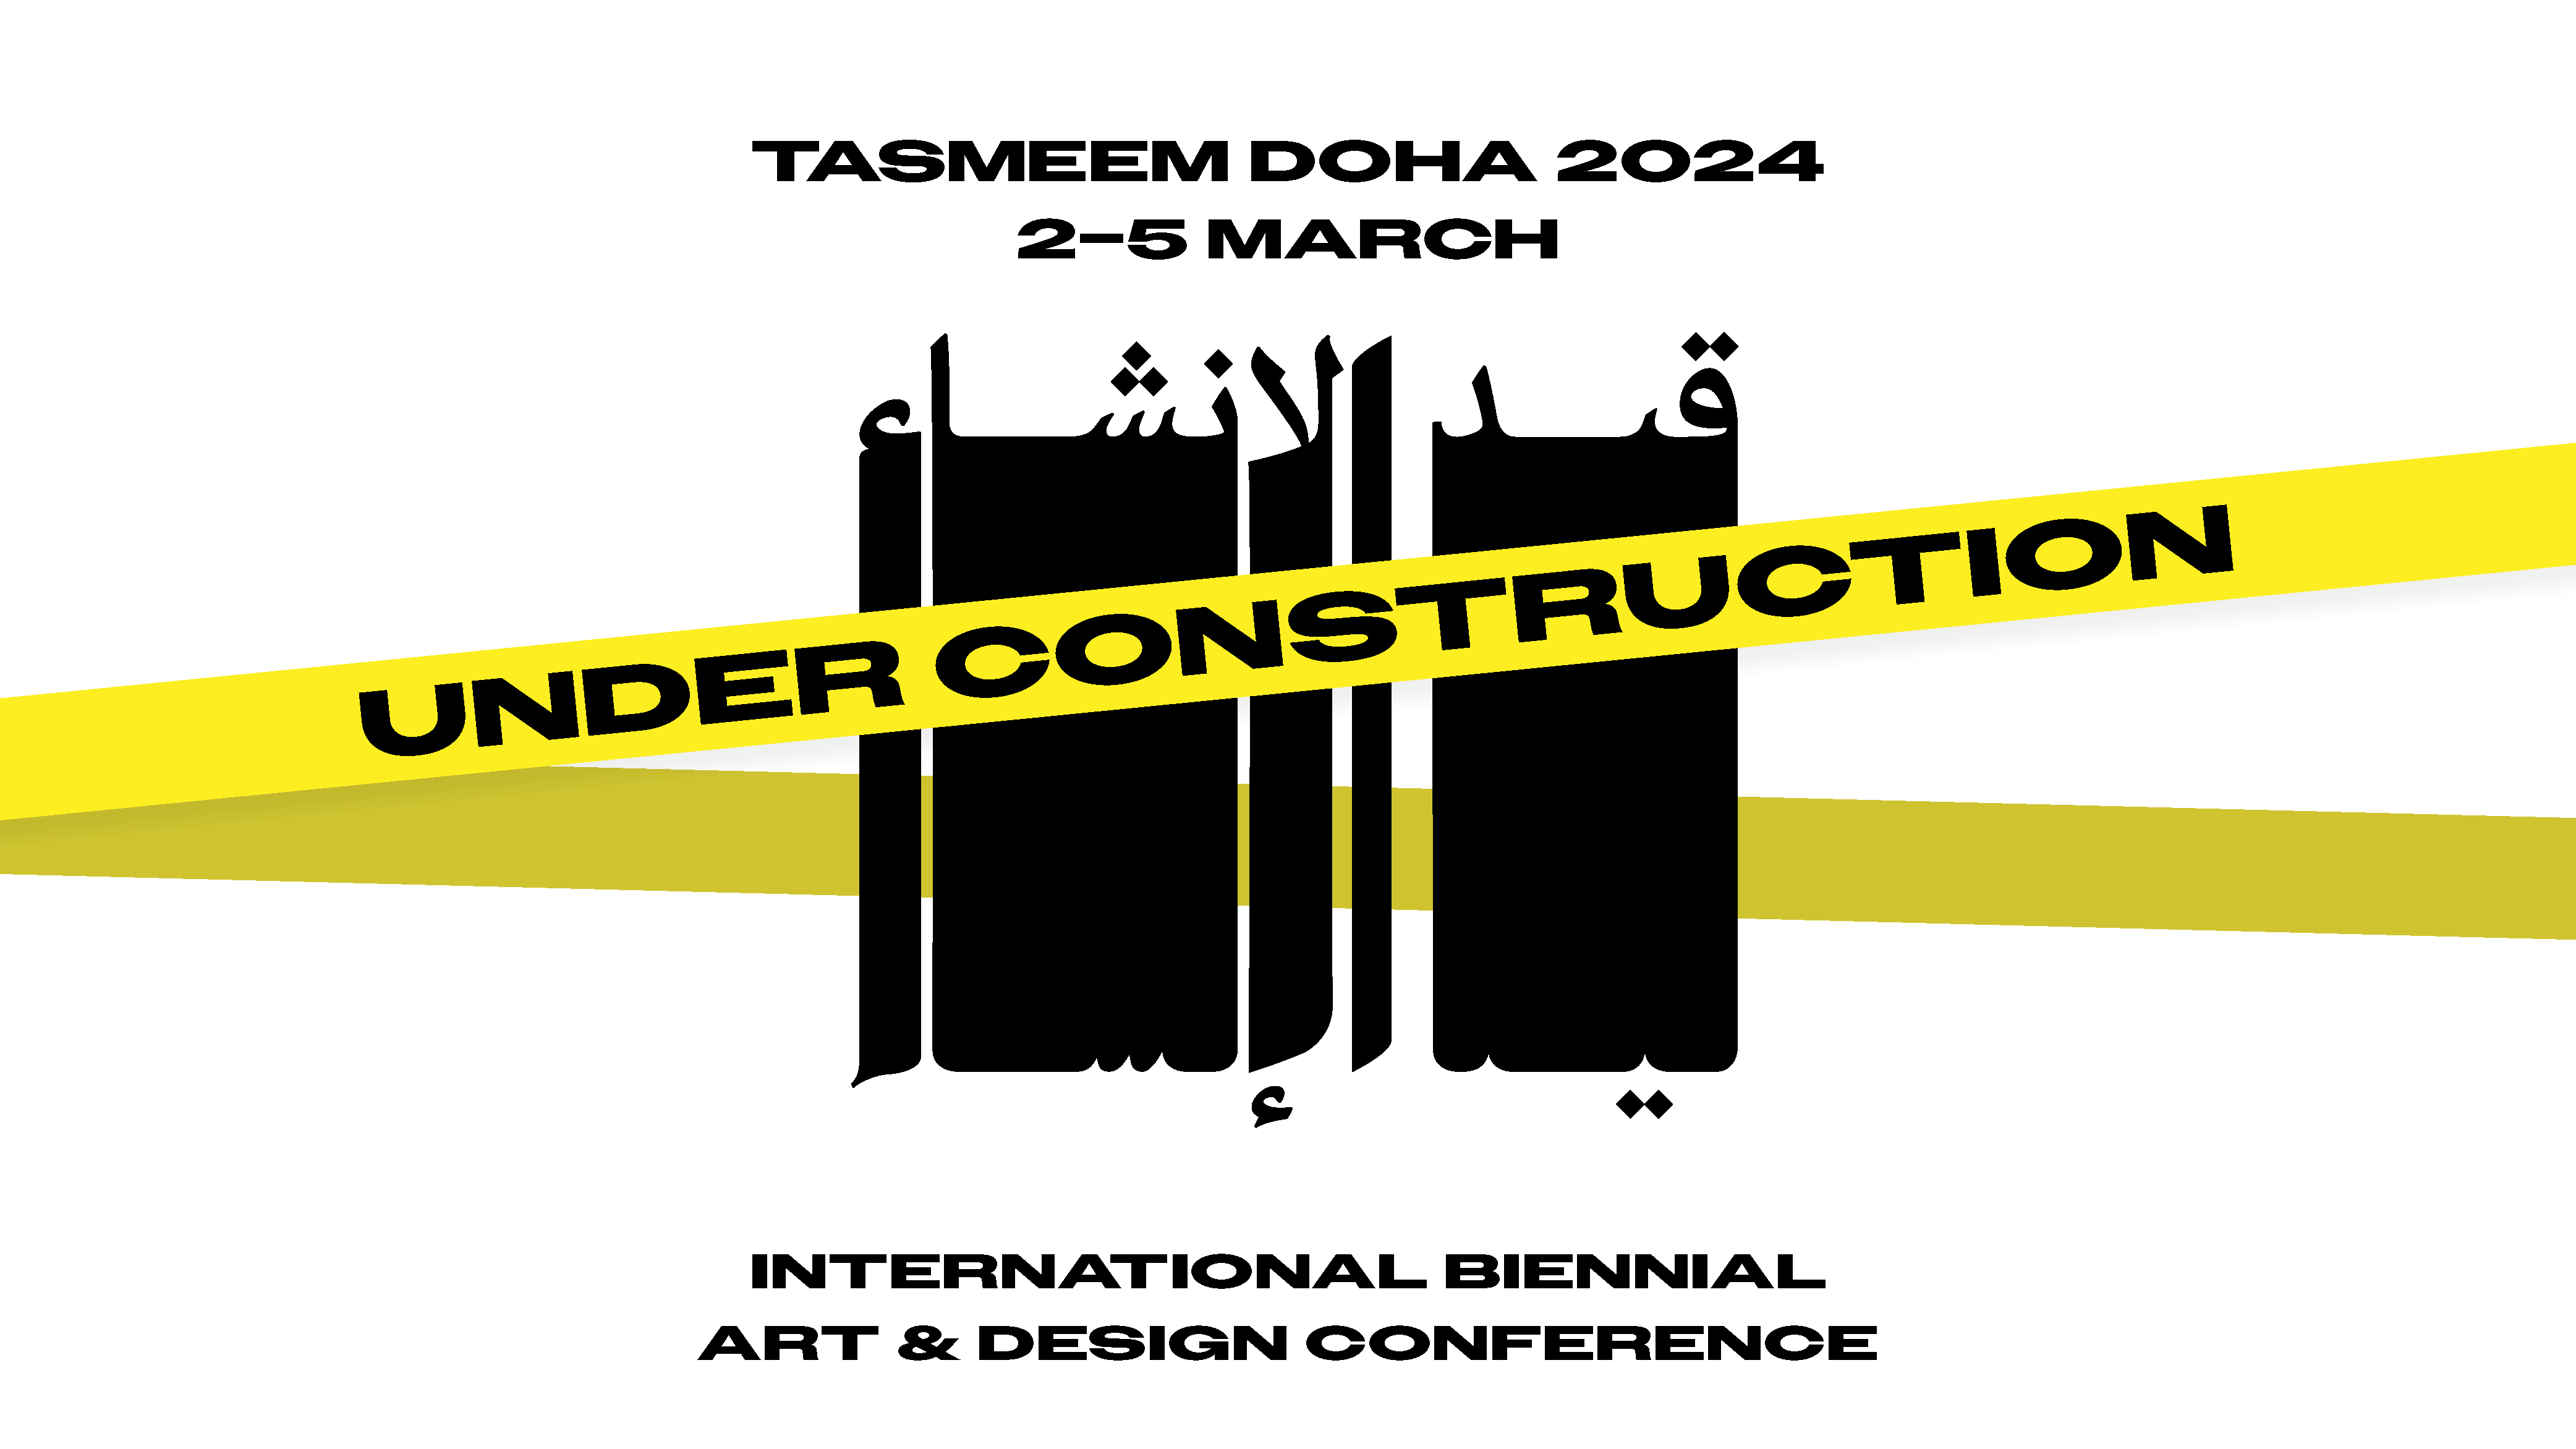 the tasmeem doha poster with the words 2-5 March . Under Construction . art and design conference